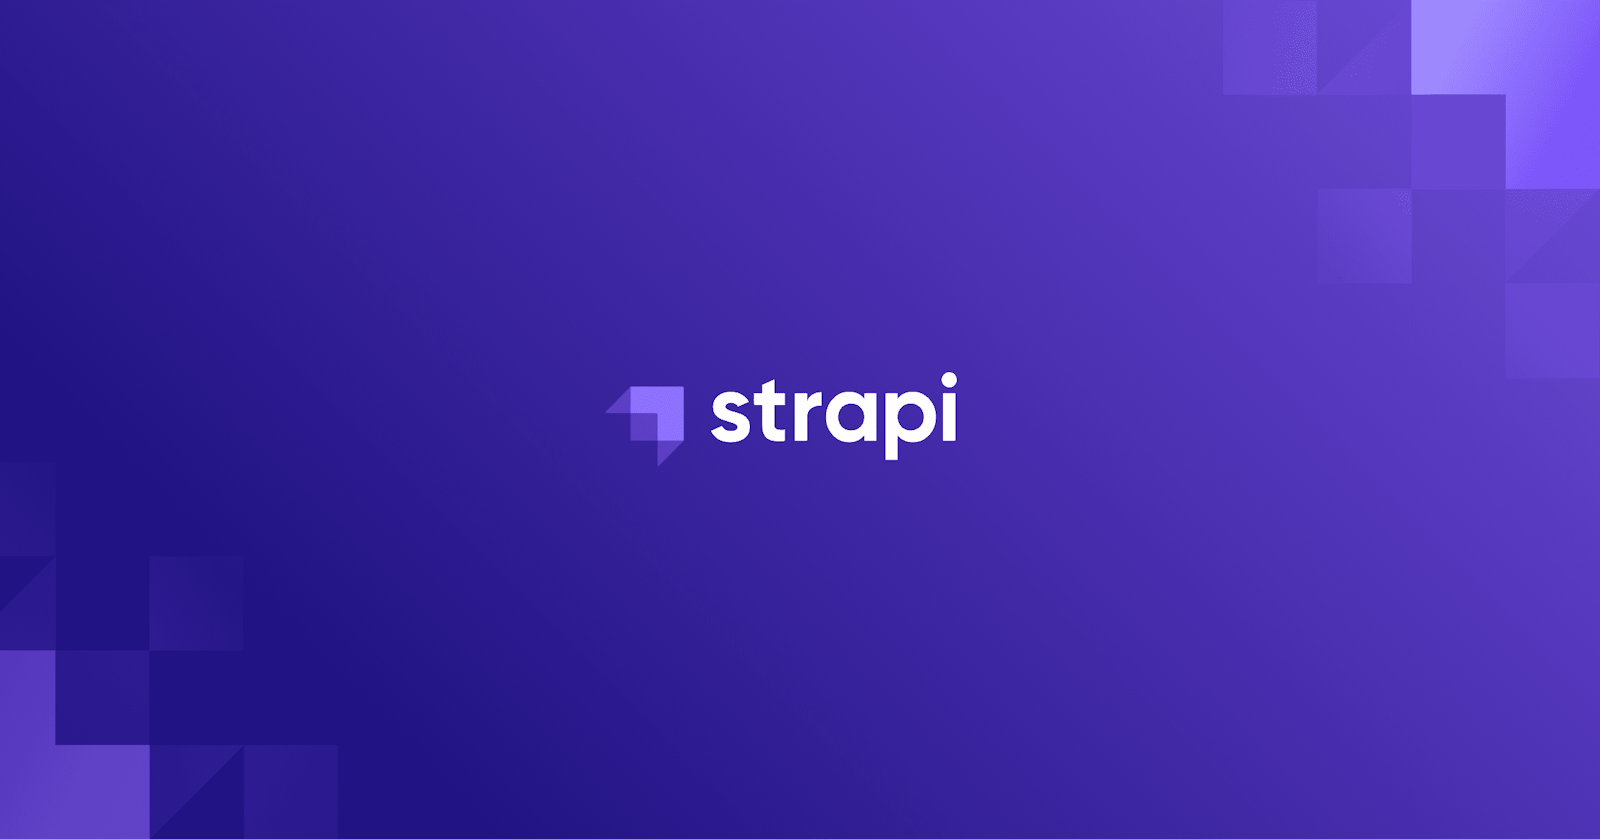 Strapi Headless CMS - The best Open Source CMS System?